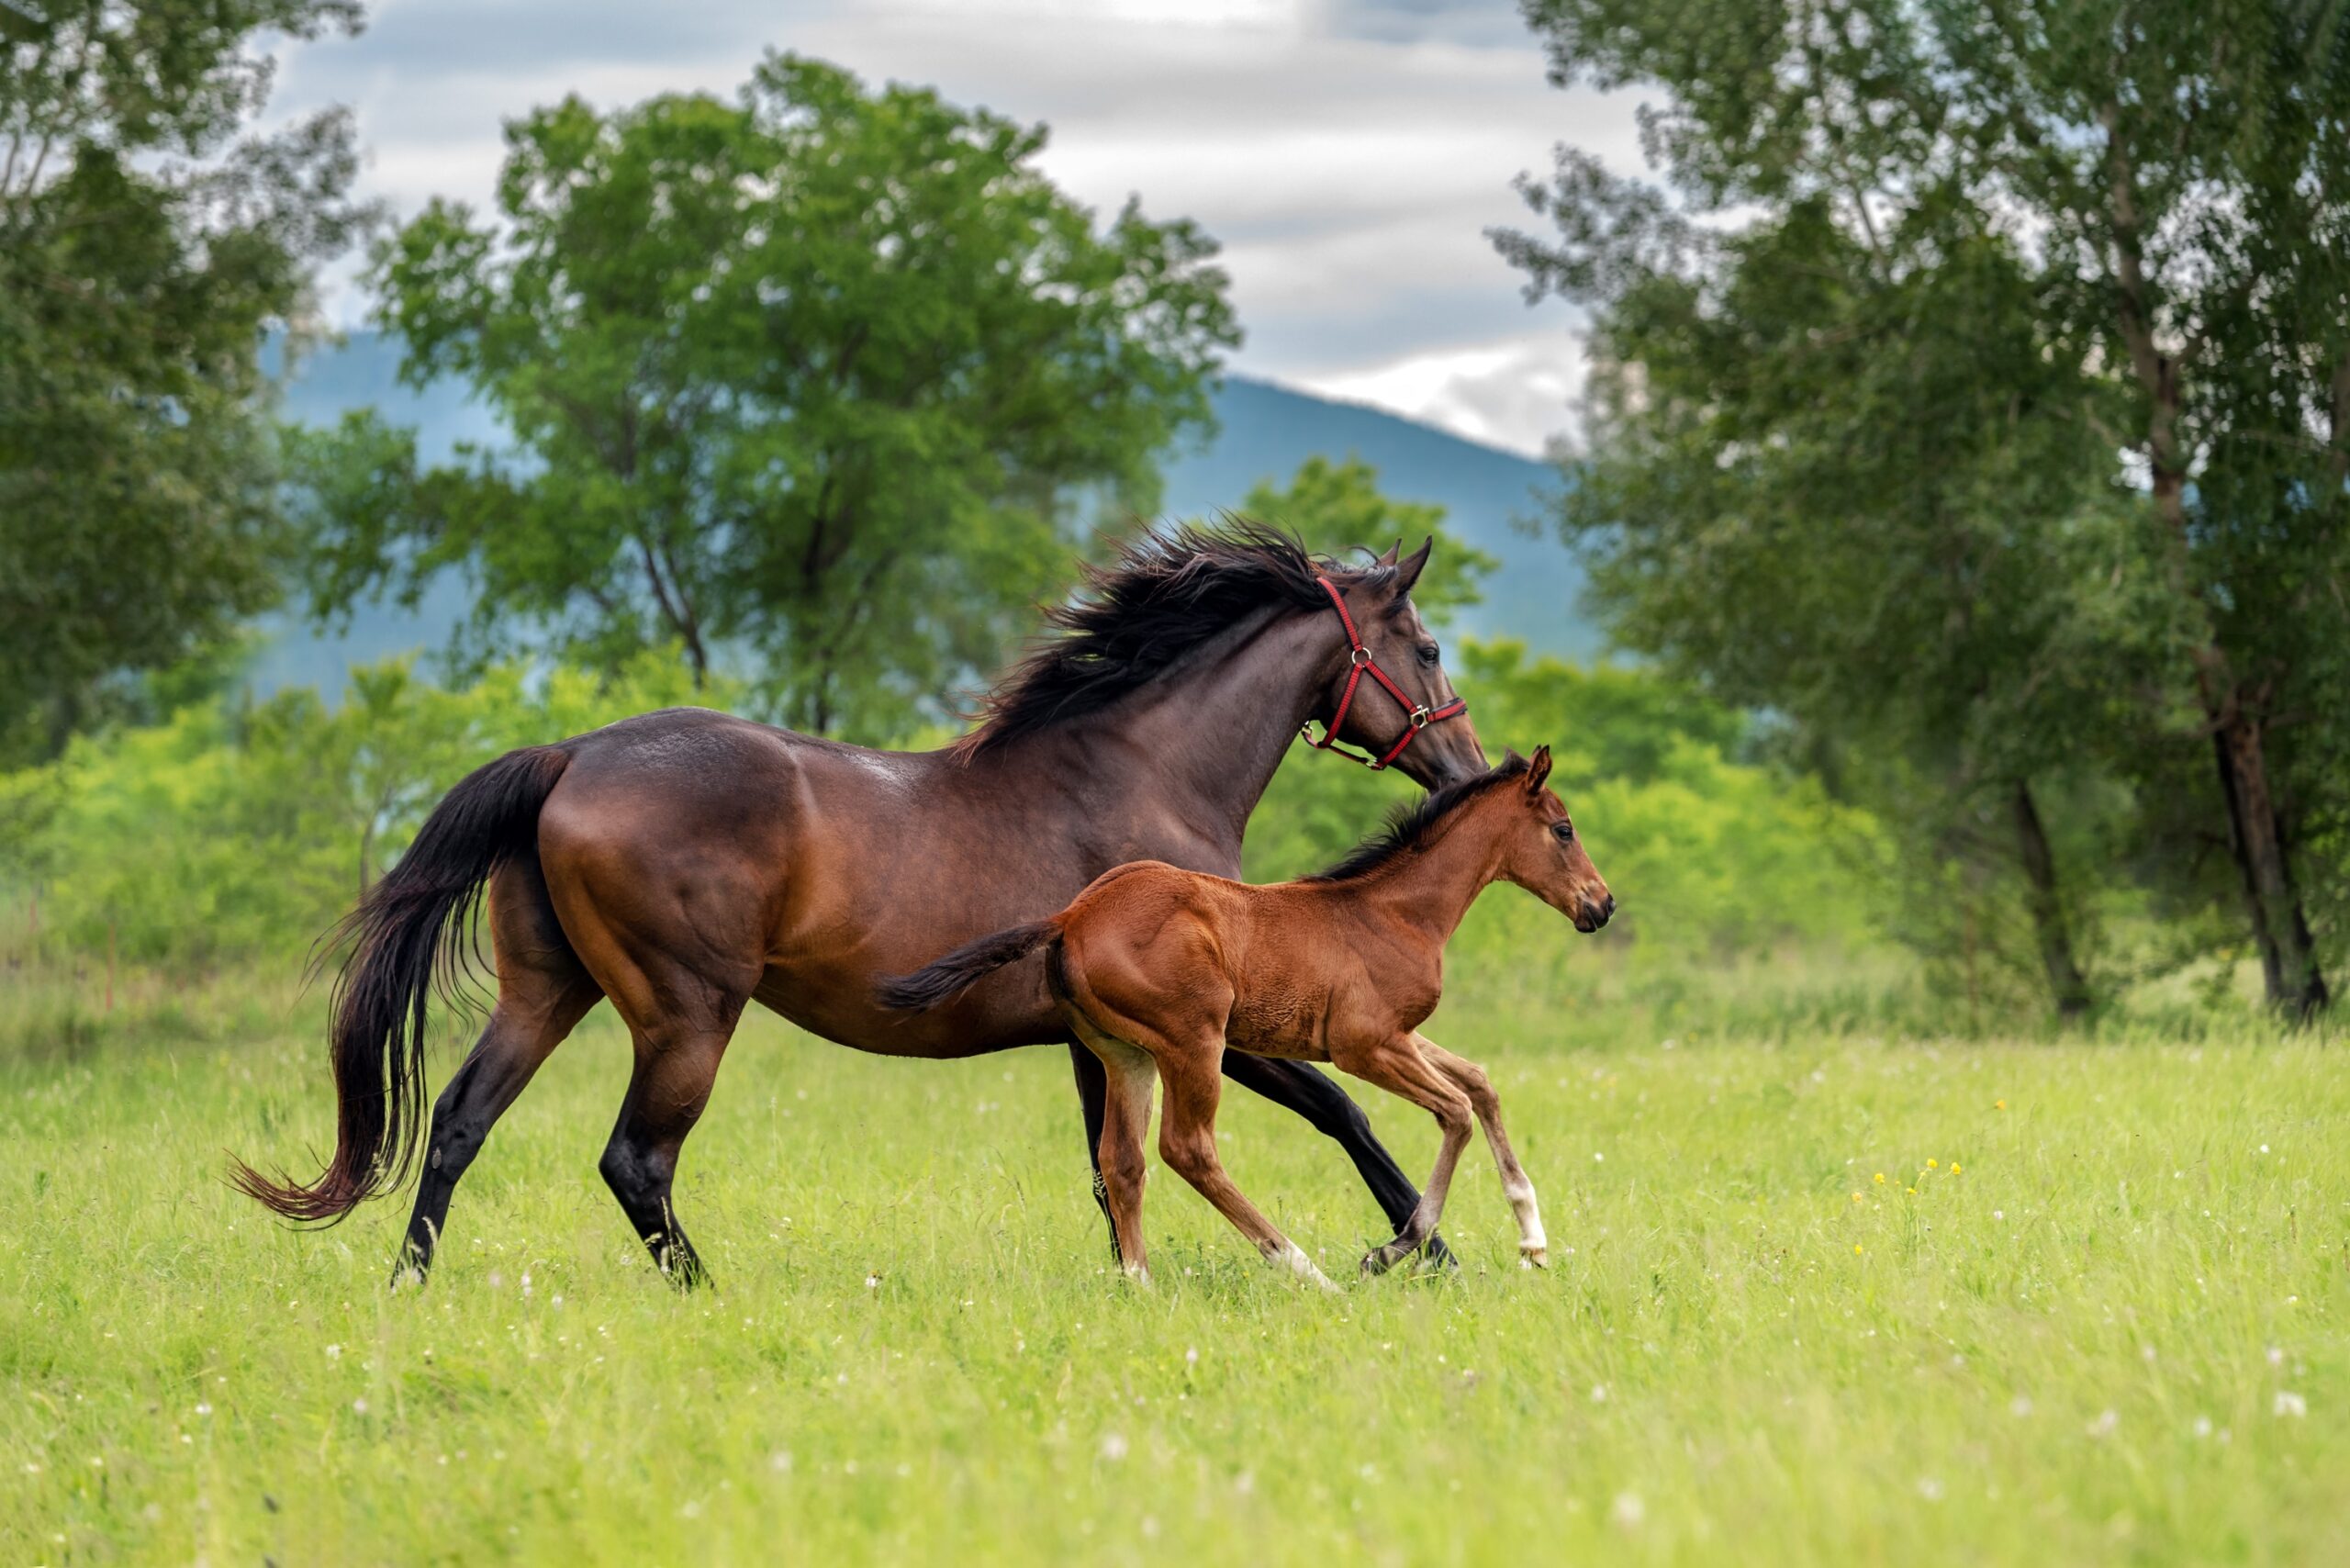 The Royal Veterinary College awarded funding to better understand early-life influences on performance and financial viability of Thoroughbred breeding